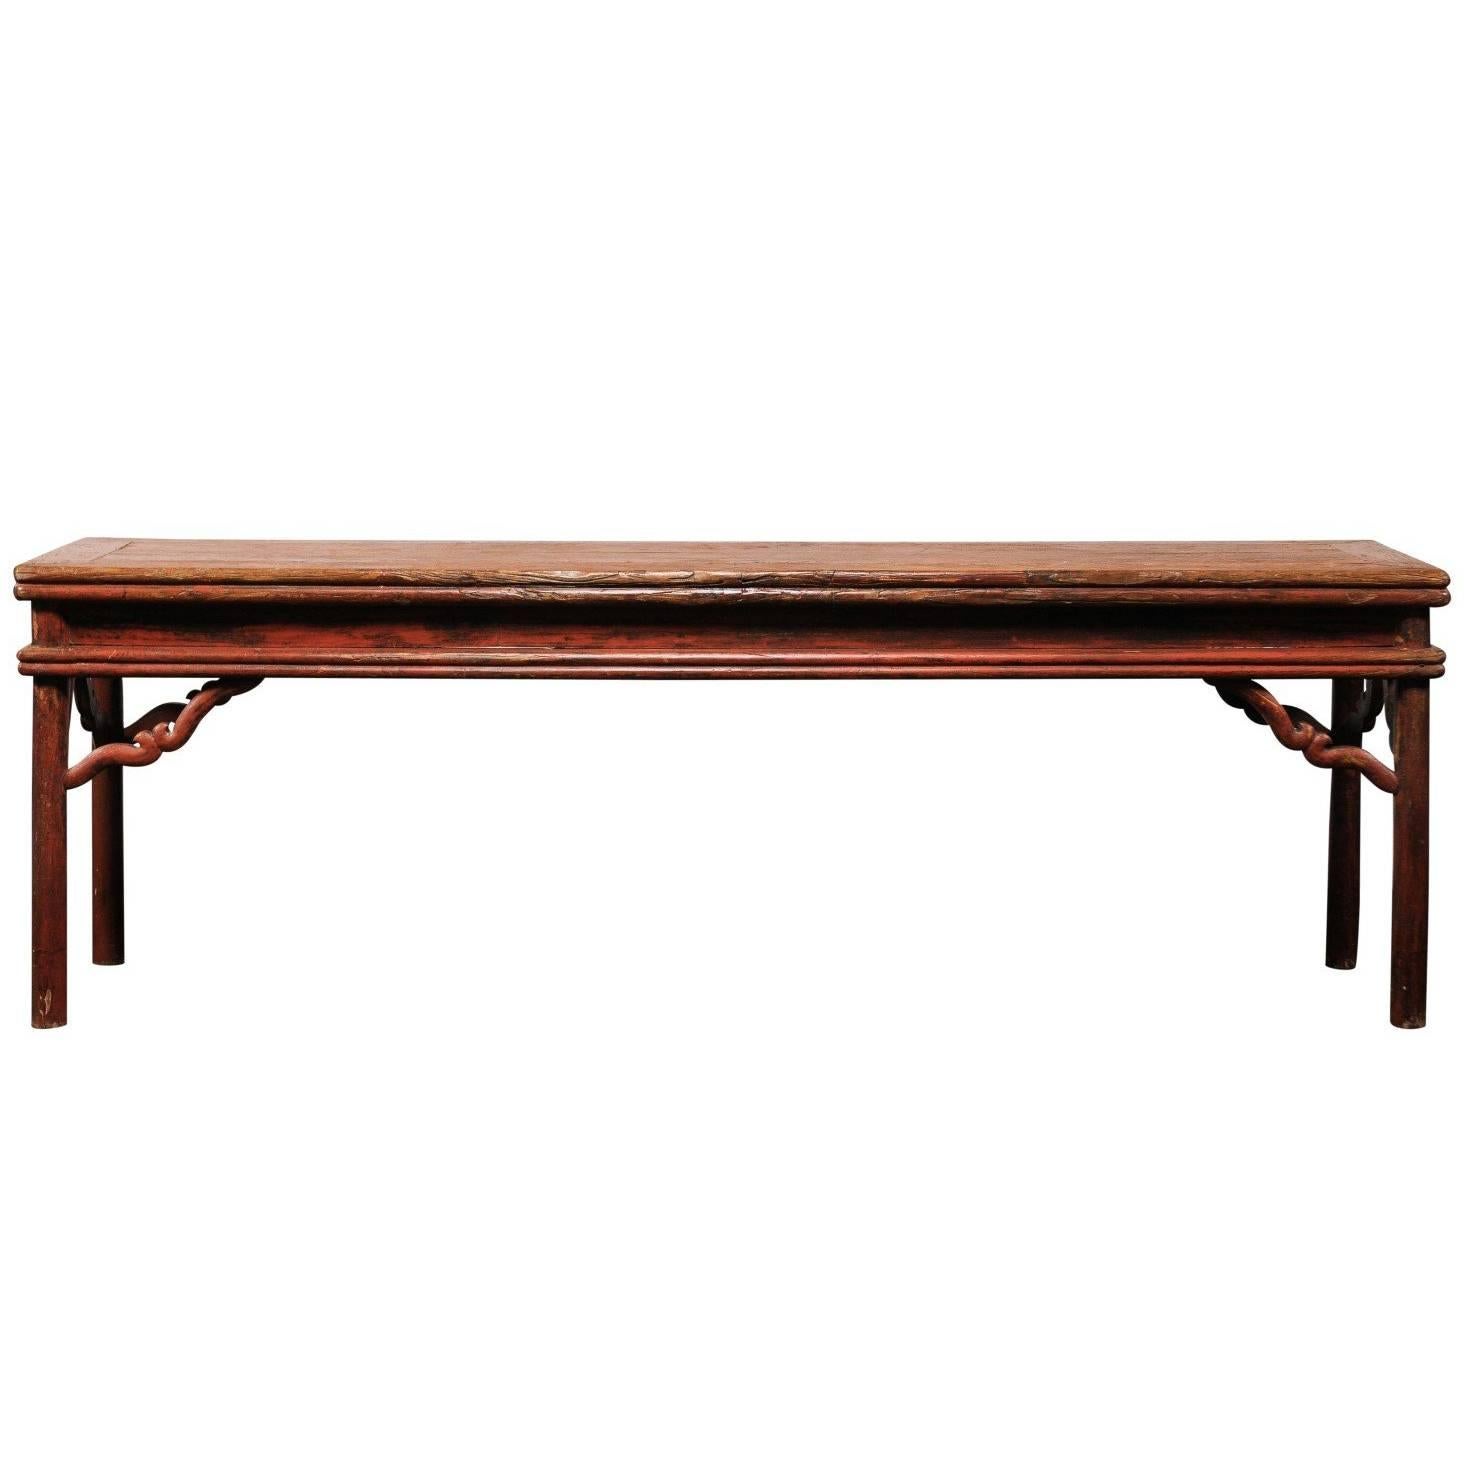 Chinese Very Long Sensational Old Lacquer Red Console Table, circa 1920